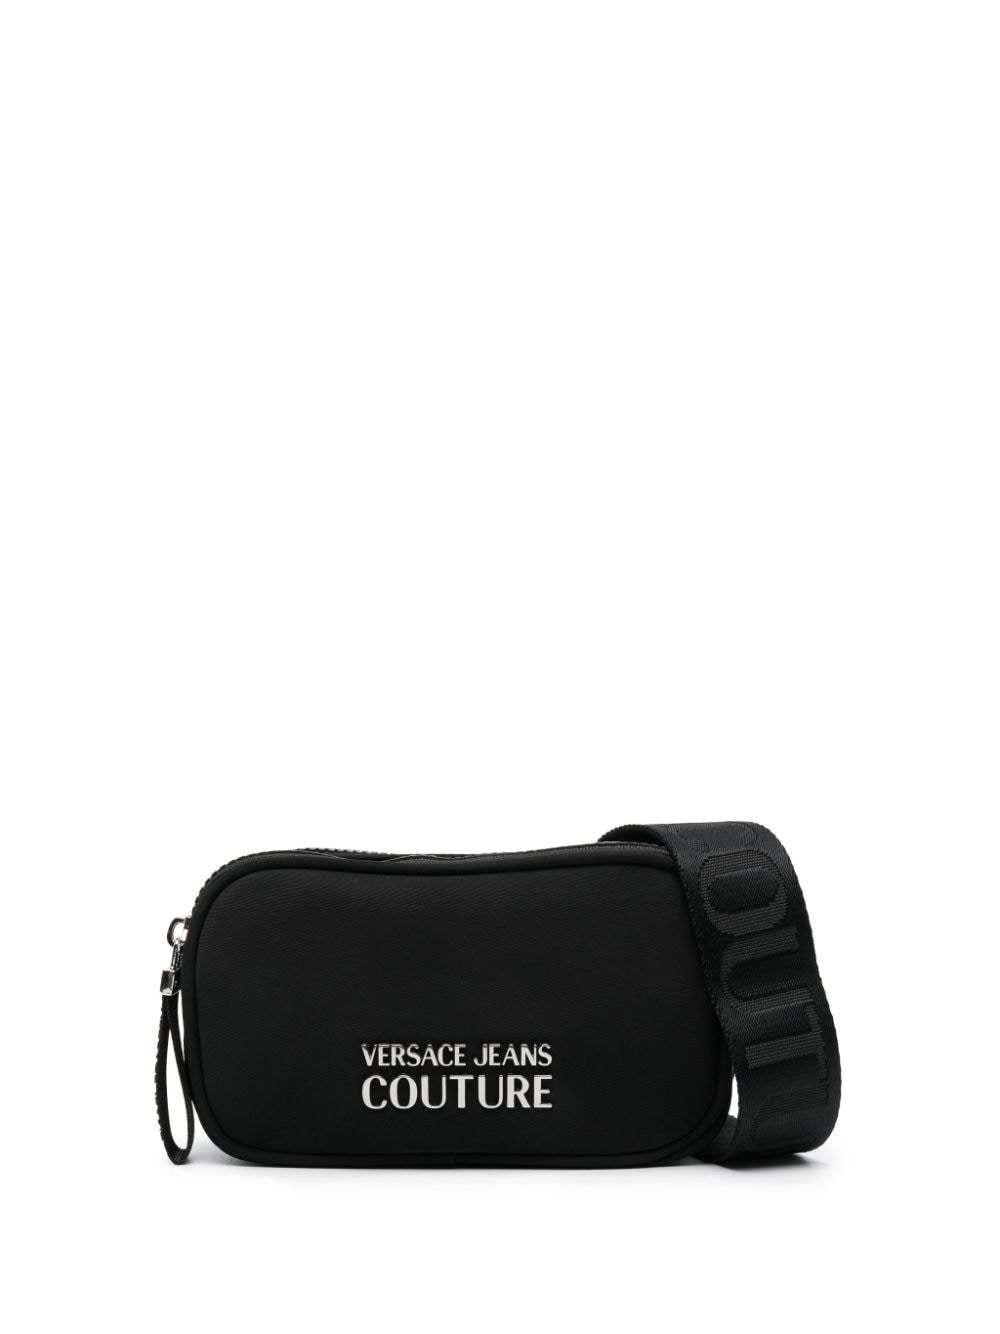 Versace Jeans Couture logo-lettering zipped crossbody bag - Black von Versace Jeans Couture